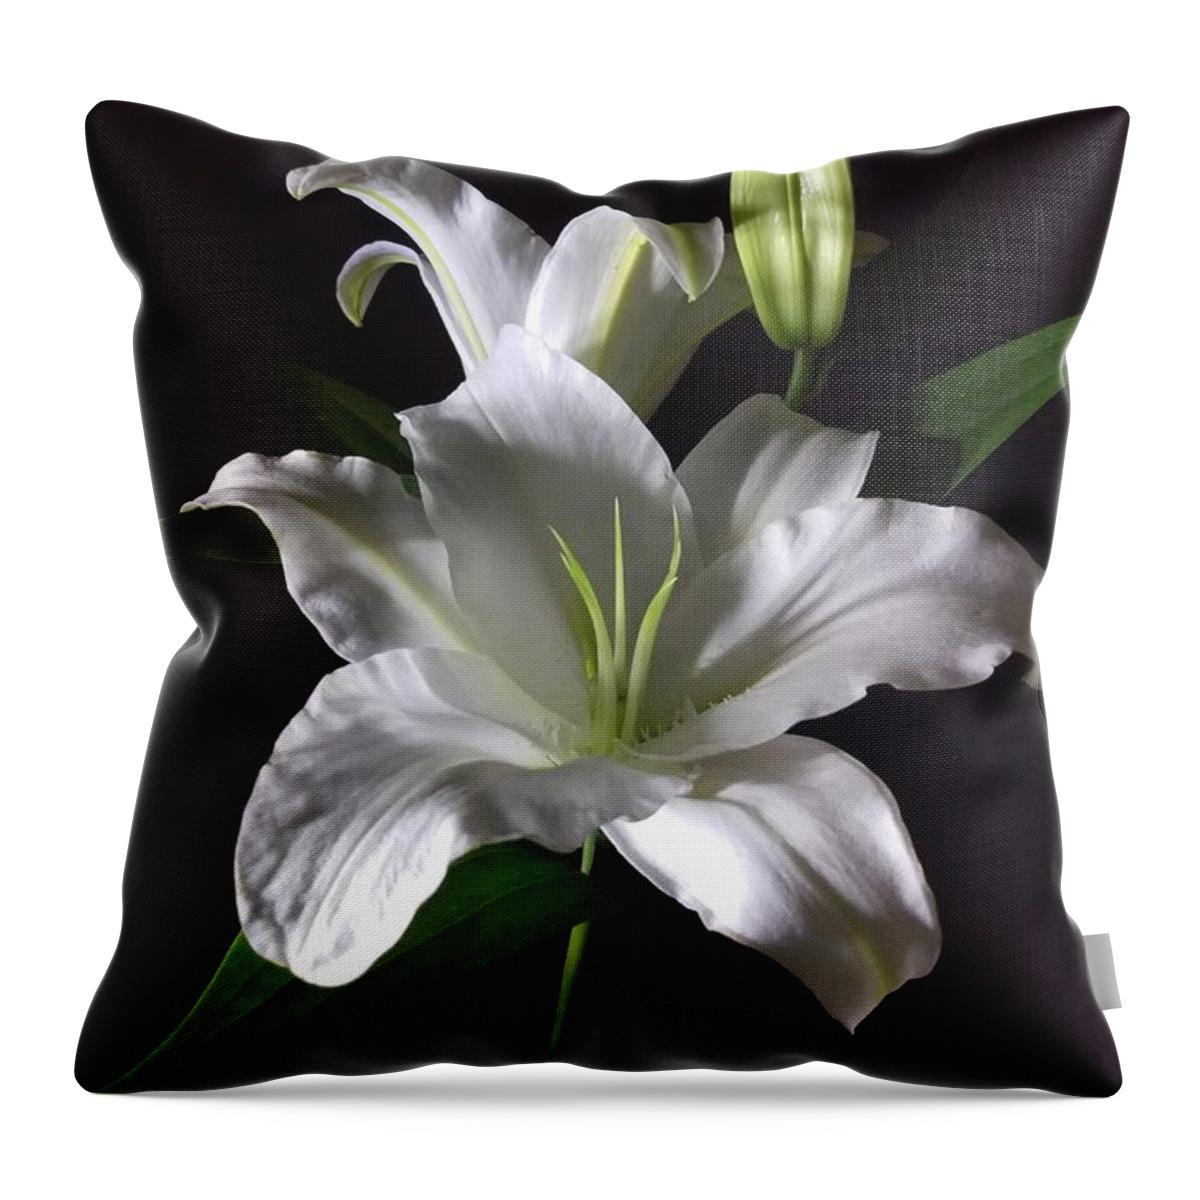 Photography Throw Pillow featuring the photograph White Lily by Delynn Addams